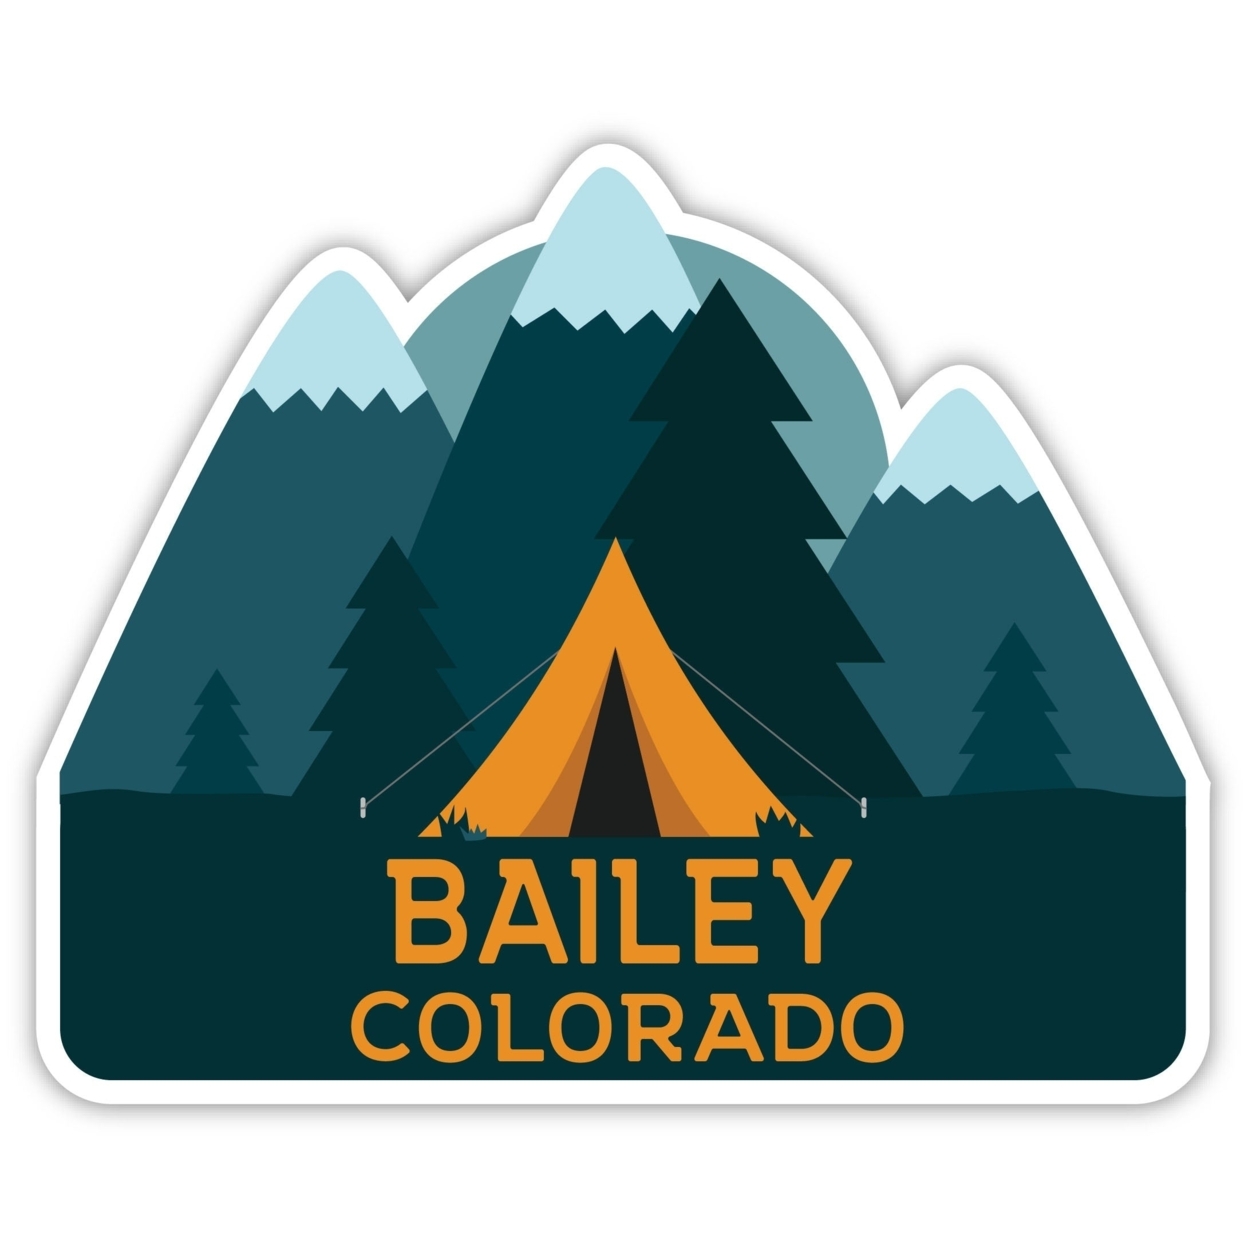 Bailey Colorado Souvenir Decorative Stickers (Choose Theme And Size) - 4-Pack, 6-Inch, Tent